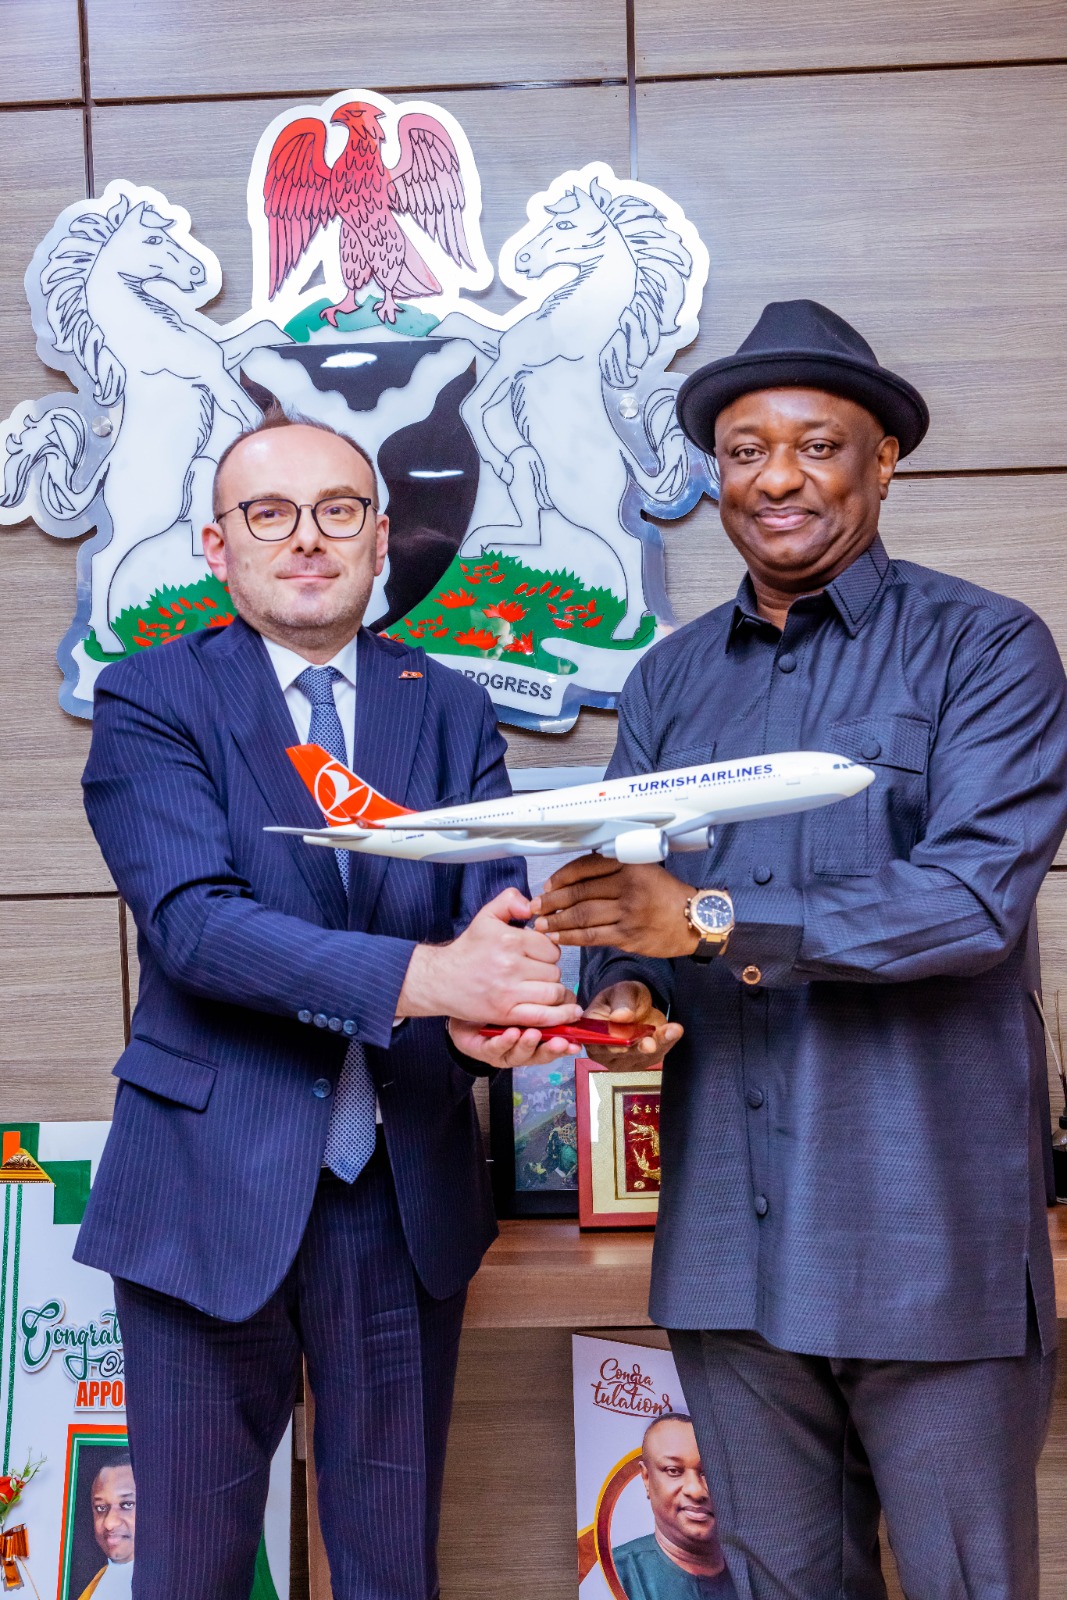 FG demands better treatment for Nigerian passengers from Turkish Airlines